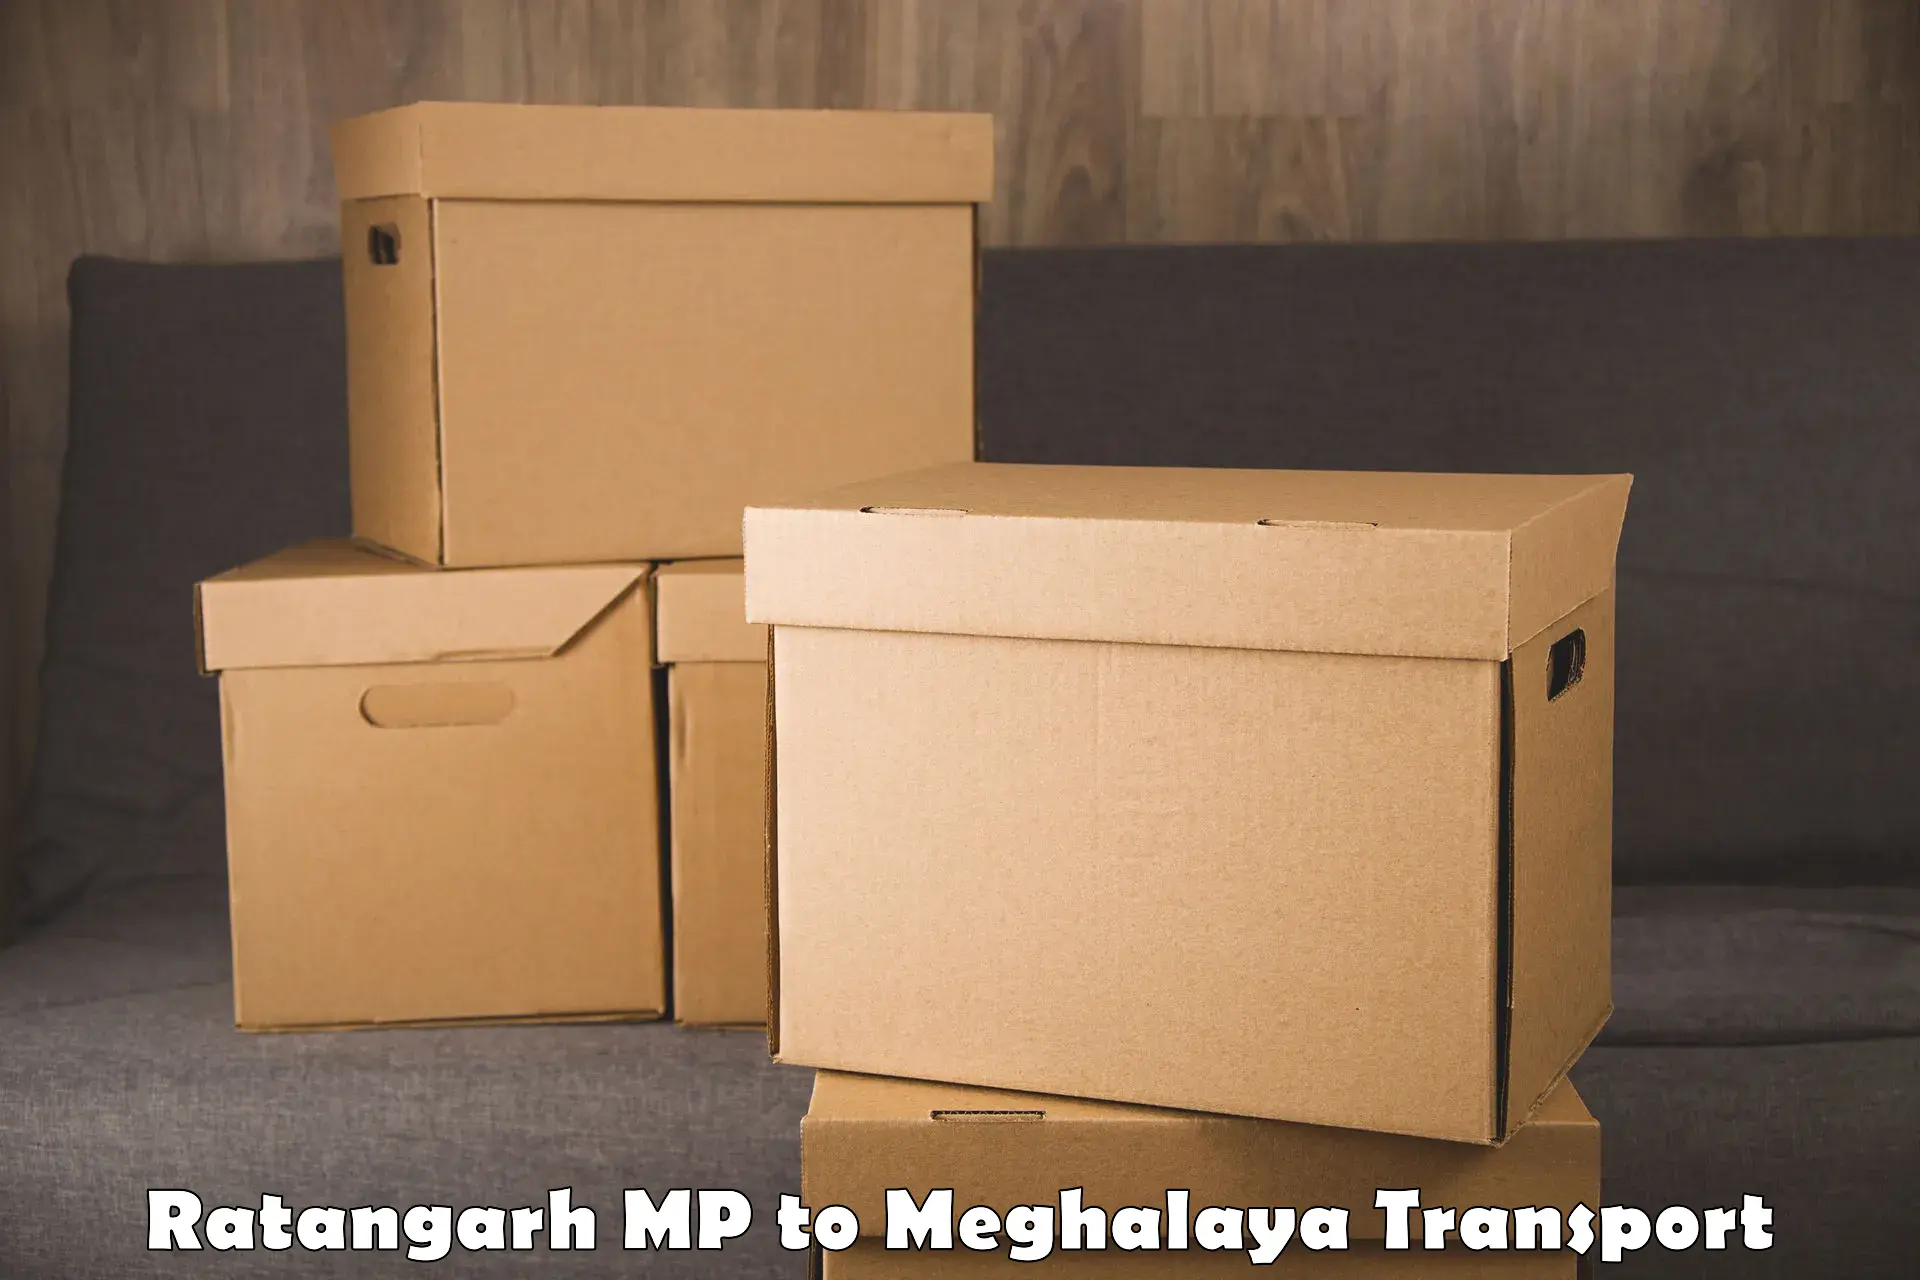 Online transport service Ratangarh MP to Umsaw